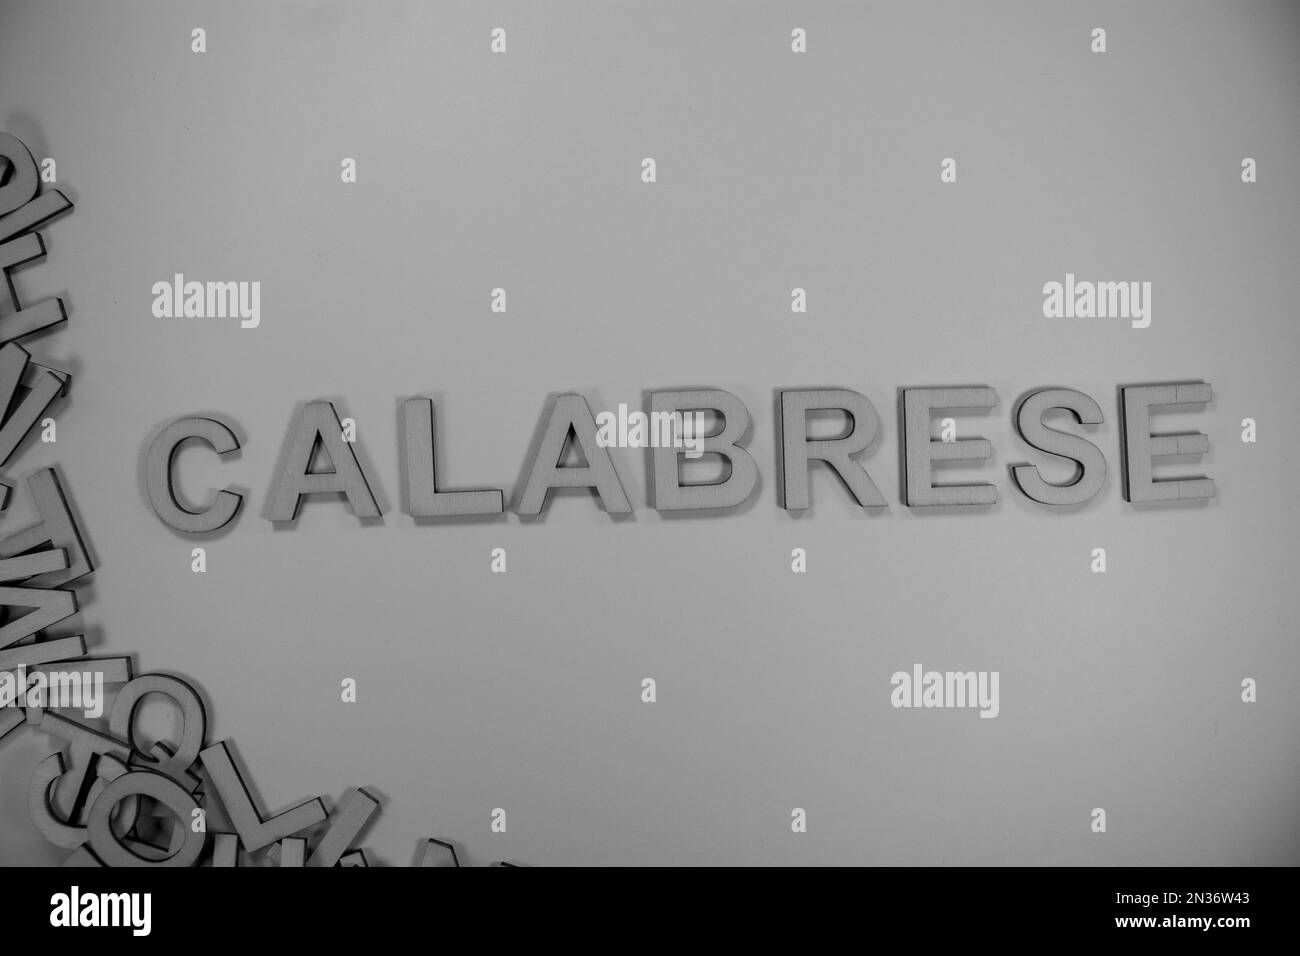 CALABRESE in wooden English words language capital letters spilling from a pile of letters in black and white Stock Photo